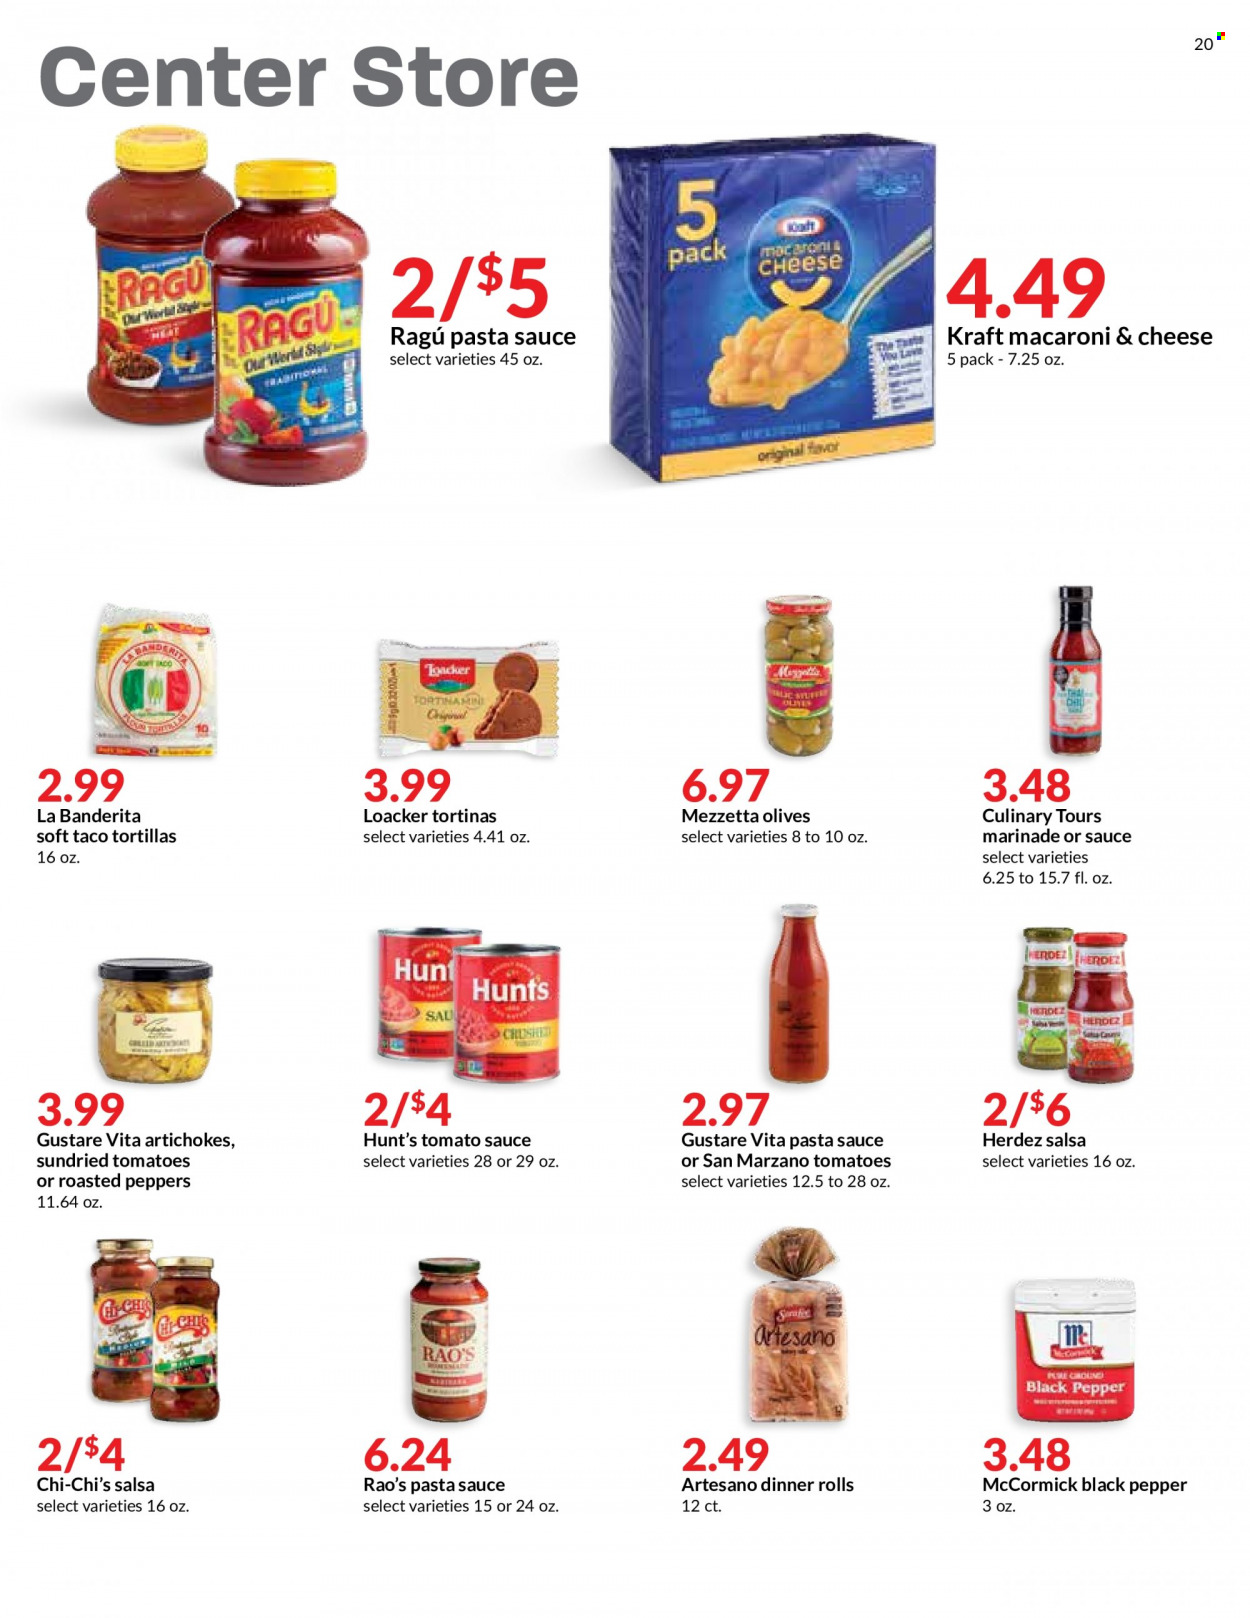 thumbnail - Hy-Vee Flyer - 12/22/2021 - 12/28/2021 - Sales products - tortillas, dinner rolls, artichoke, tomatoes, peppers, macaroni & cheese, pasta sauce, Kraft®, ragú pasta, dried tomatoes, tomato sauce, olives, black pepper, salsa, marinade, ragu. Page 20.